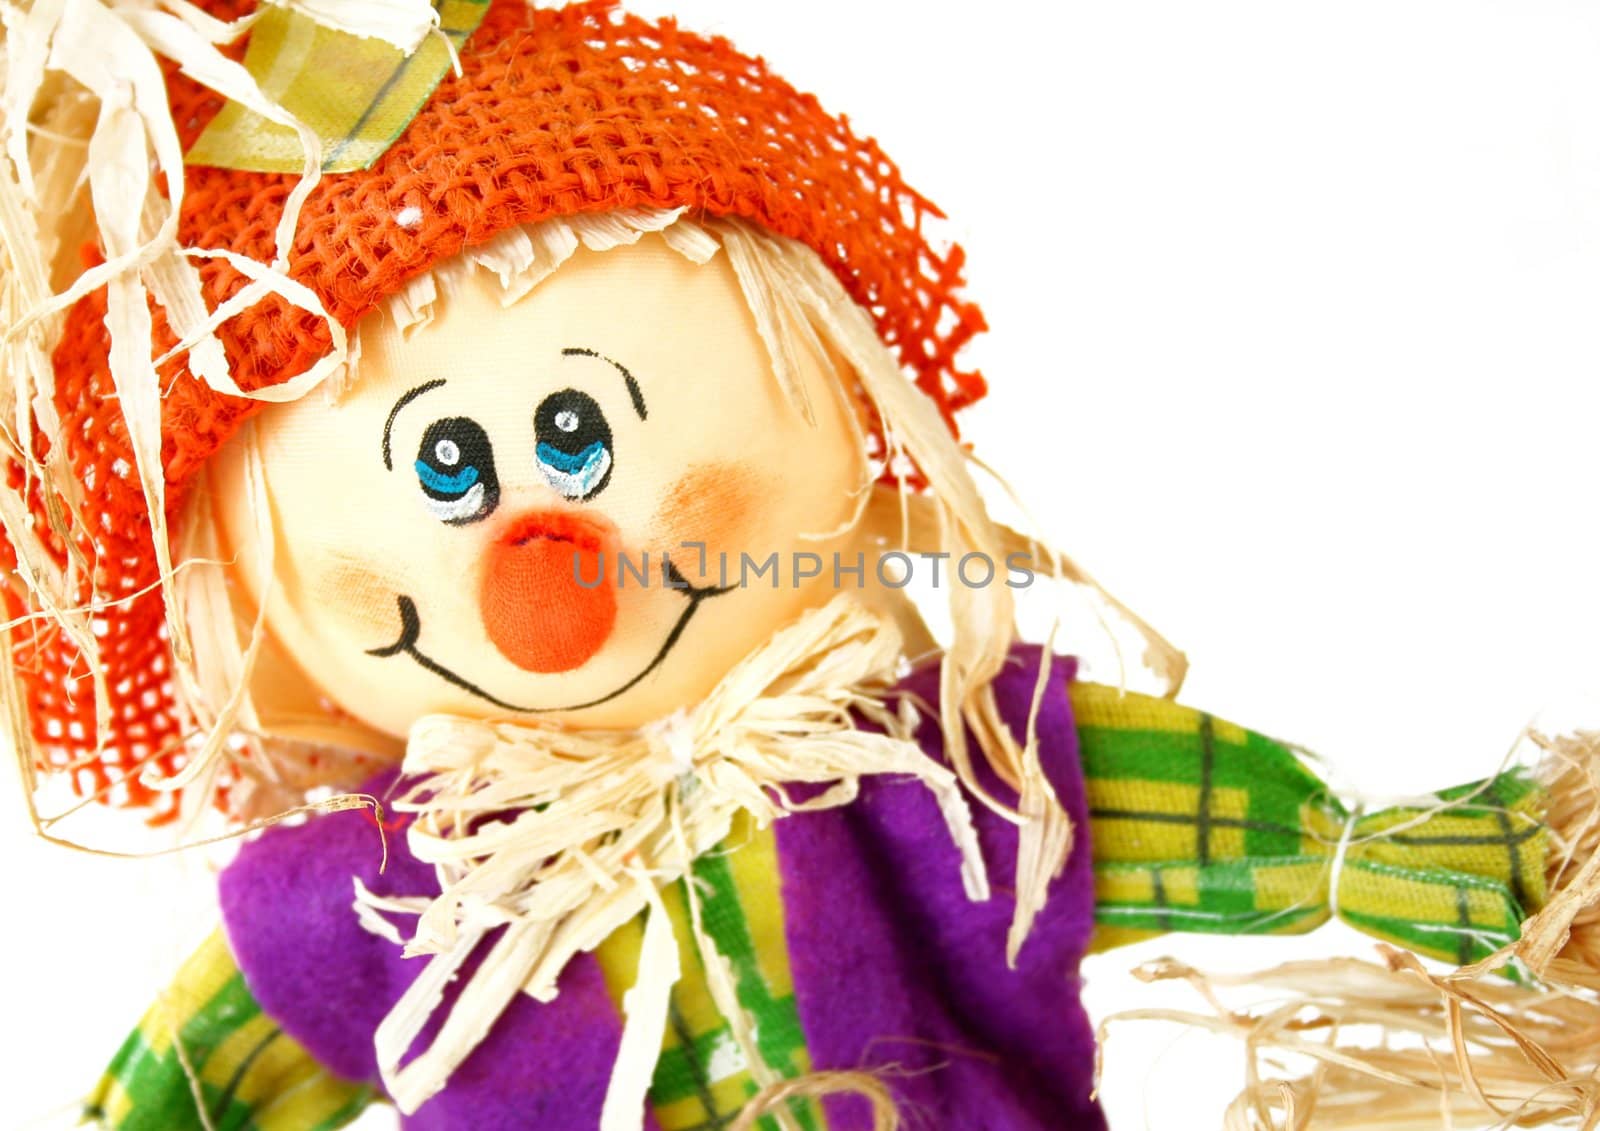 Close up of a scarecrow isolated on a white background. Used a shallow depth of field and selective focus on the face.